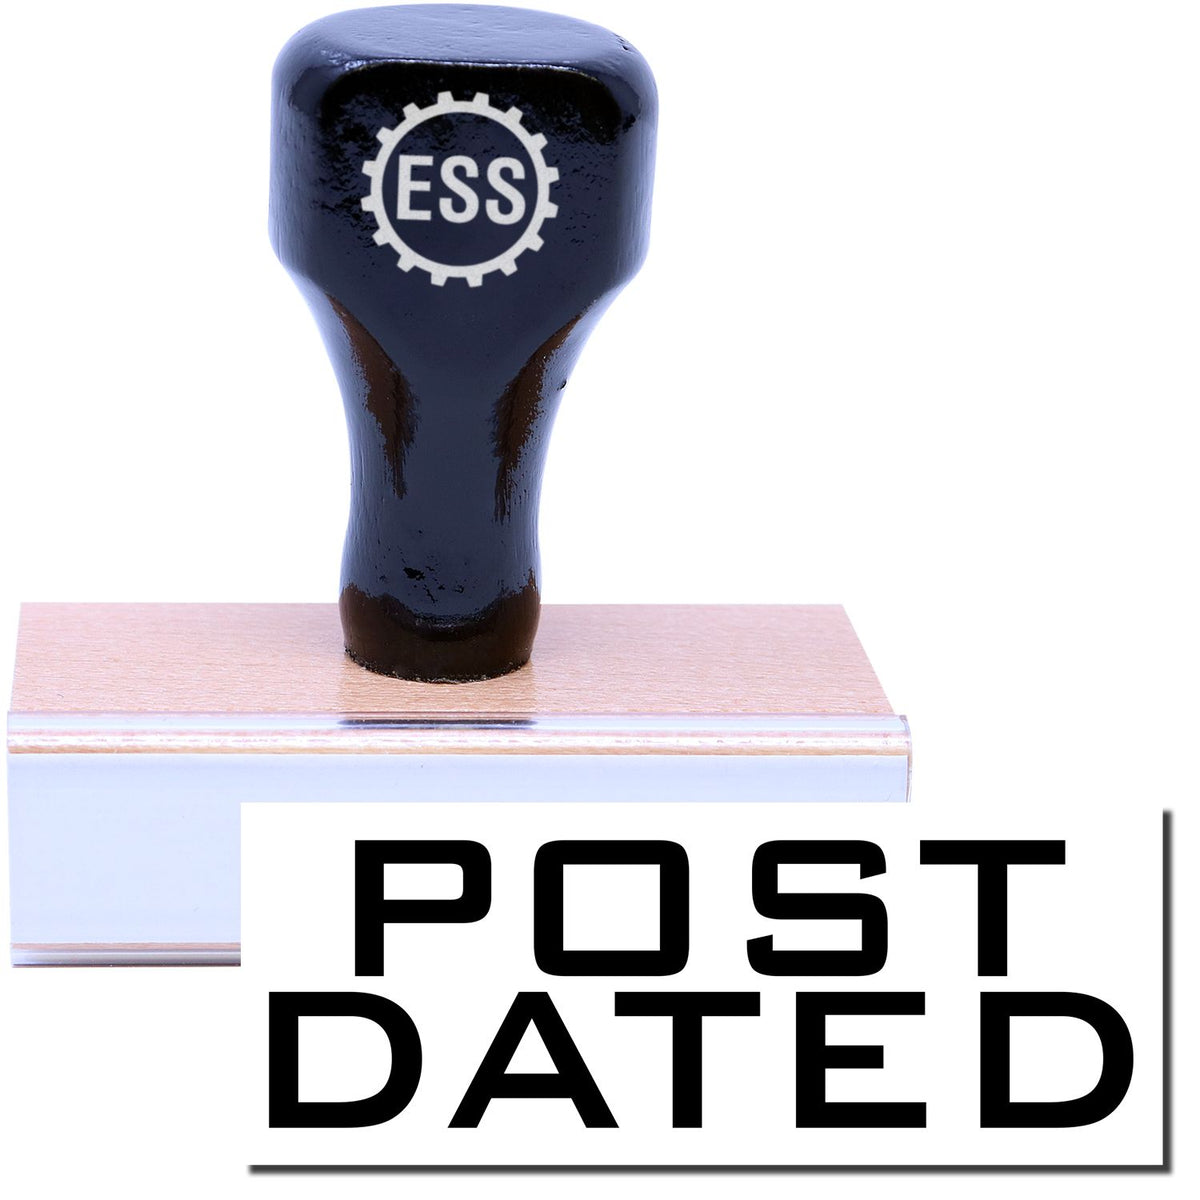 A stock office rubber stamp with a stamped image showing how the text &quot;POST DATED&quot; in a large font is displayed after stamping.